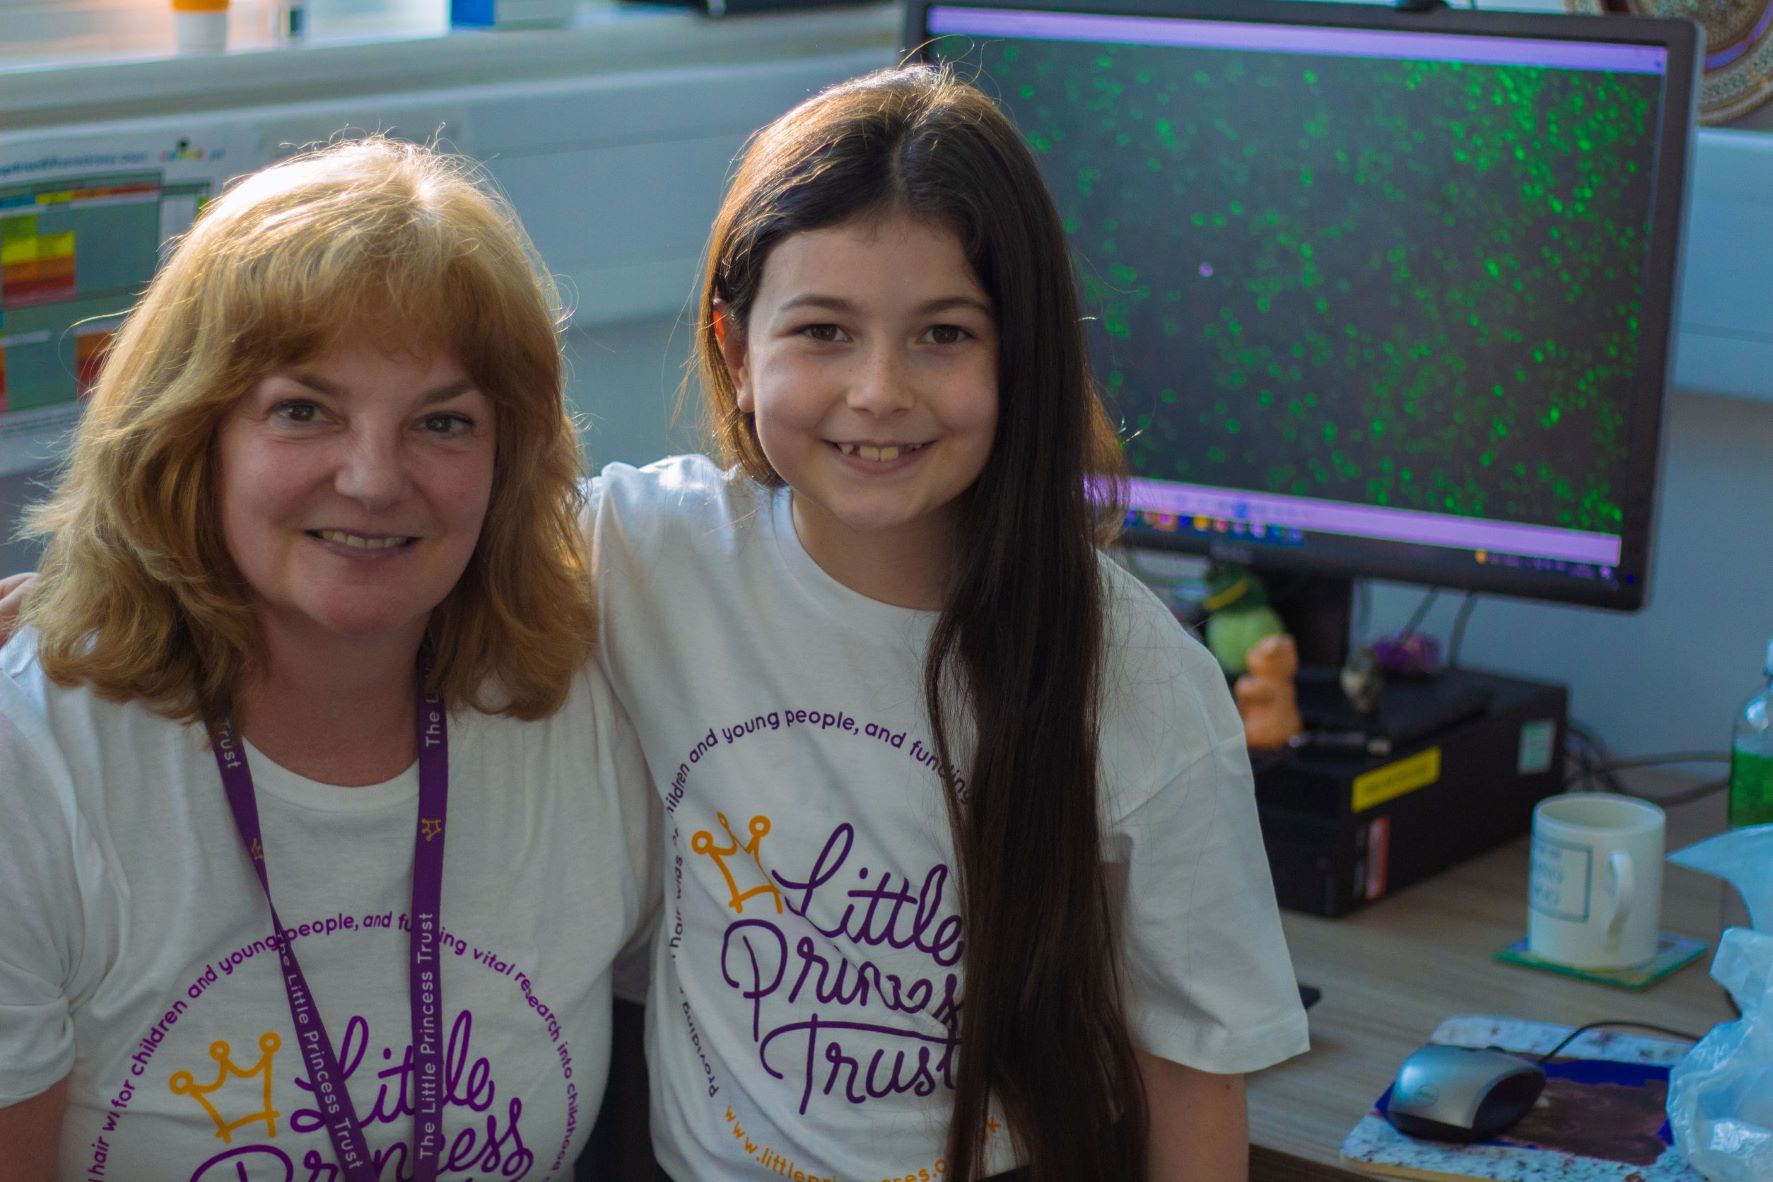 Charlotte Davison was inspired to help LPT after hearing about the childhood cancer research performed by her great-auntie Julie Irving.